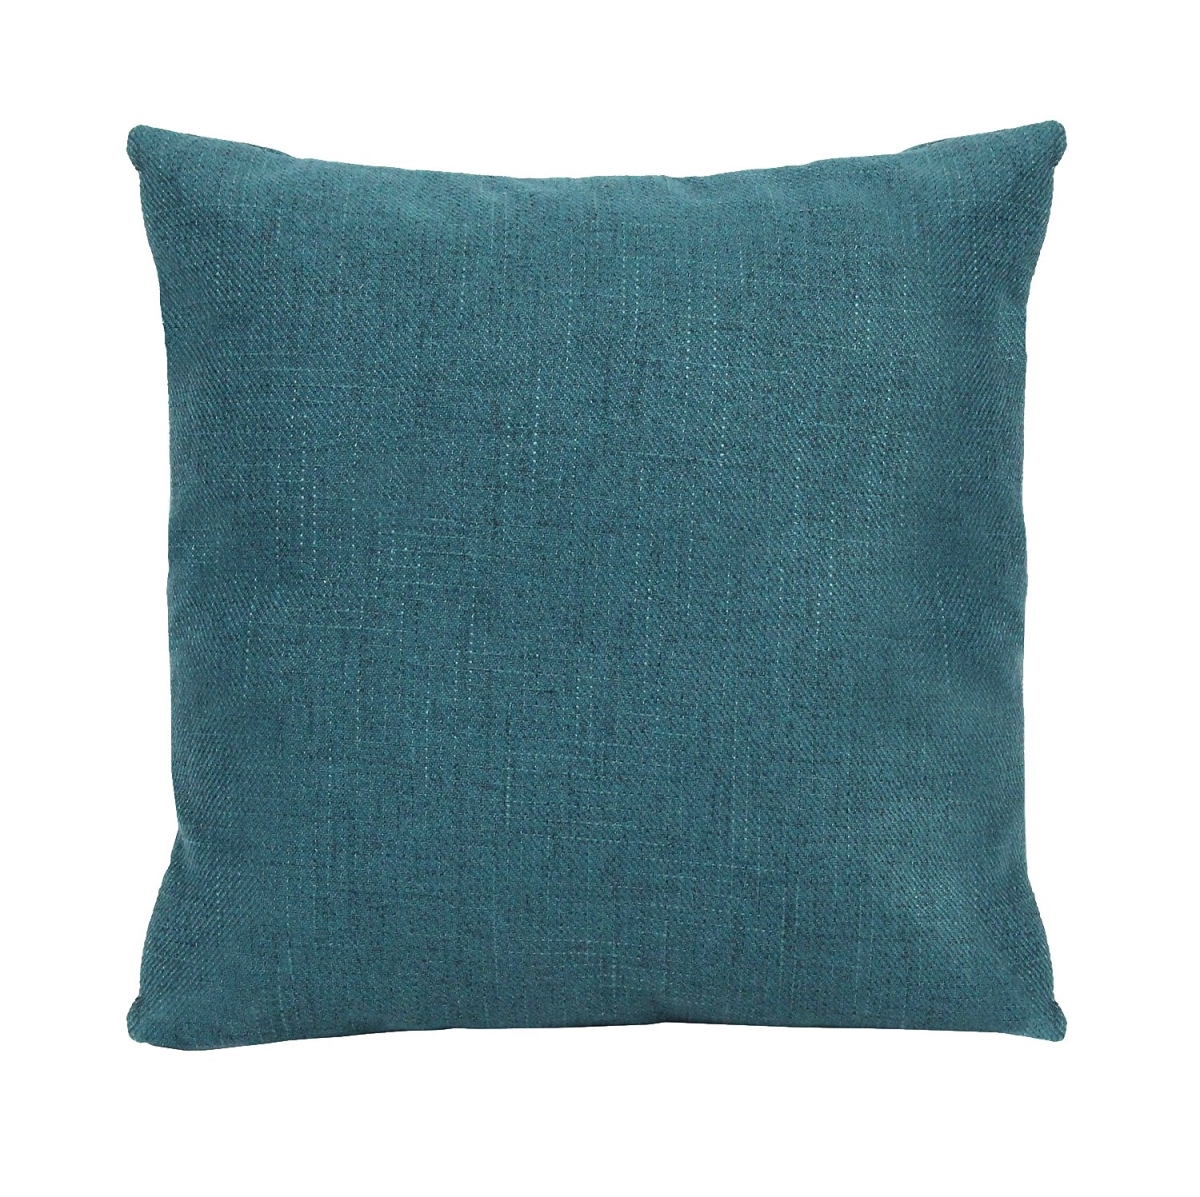 Home Roots Beddings 331460 Tweed Pillow, Blue